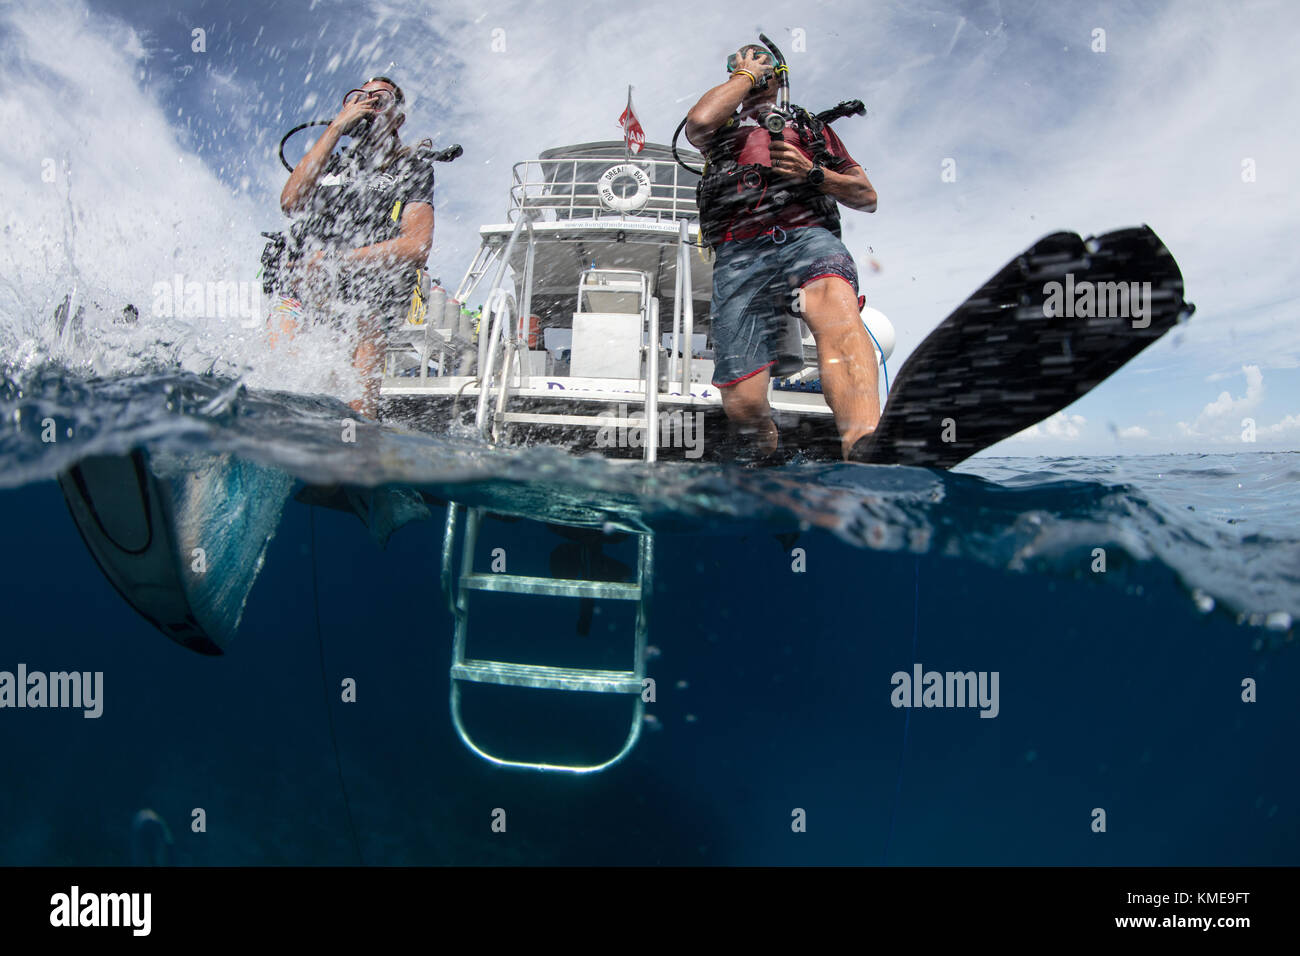 Scuba divers enter water doing giant stride. Stock Photo